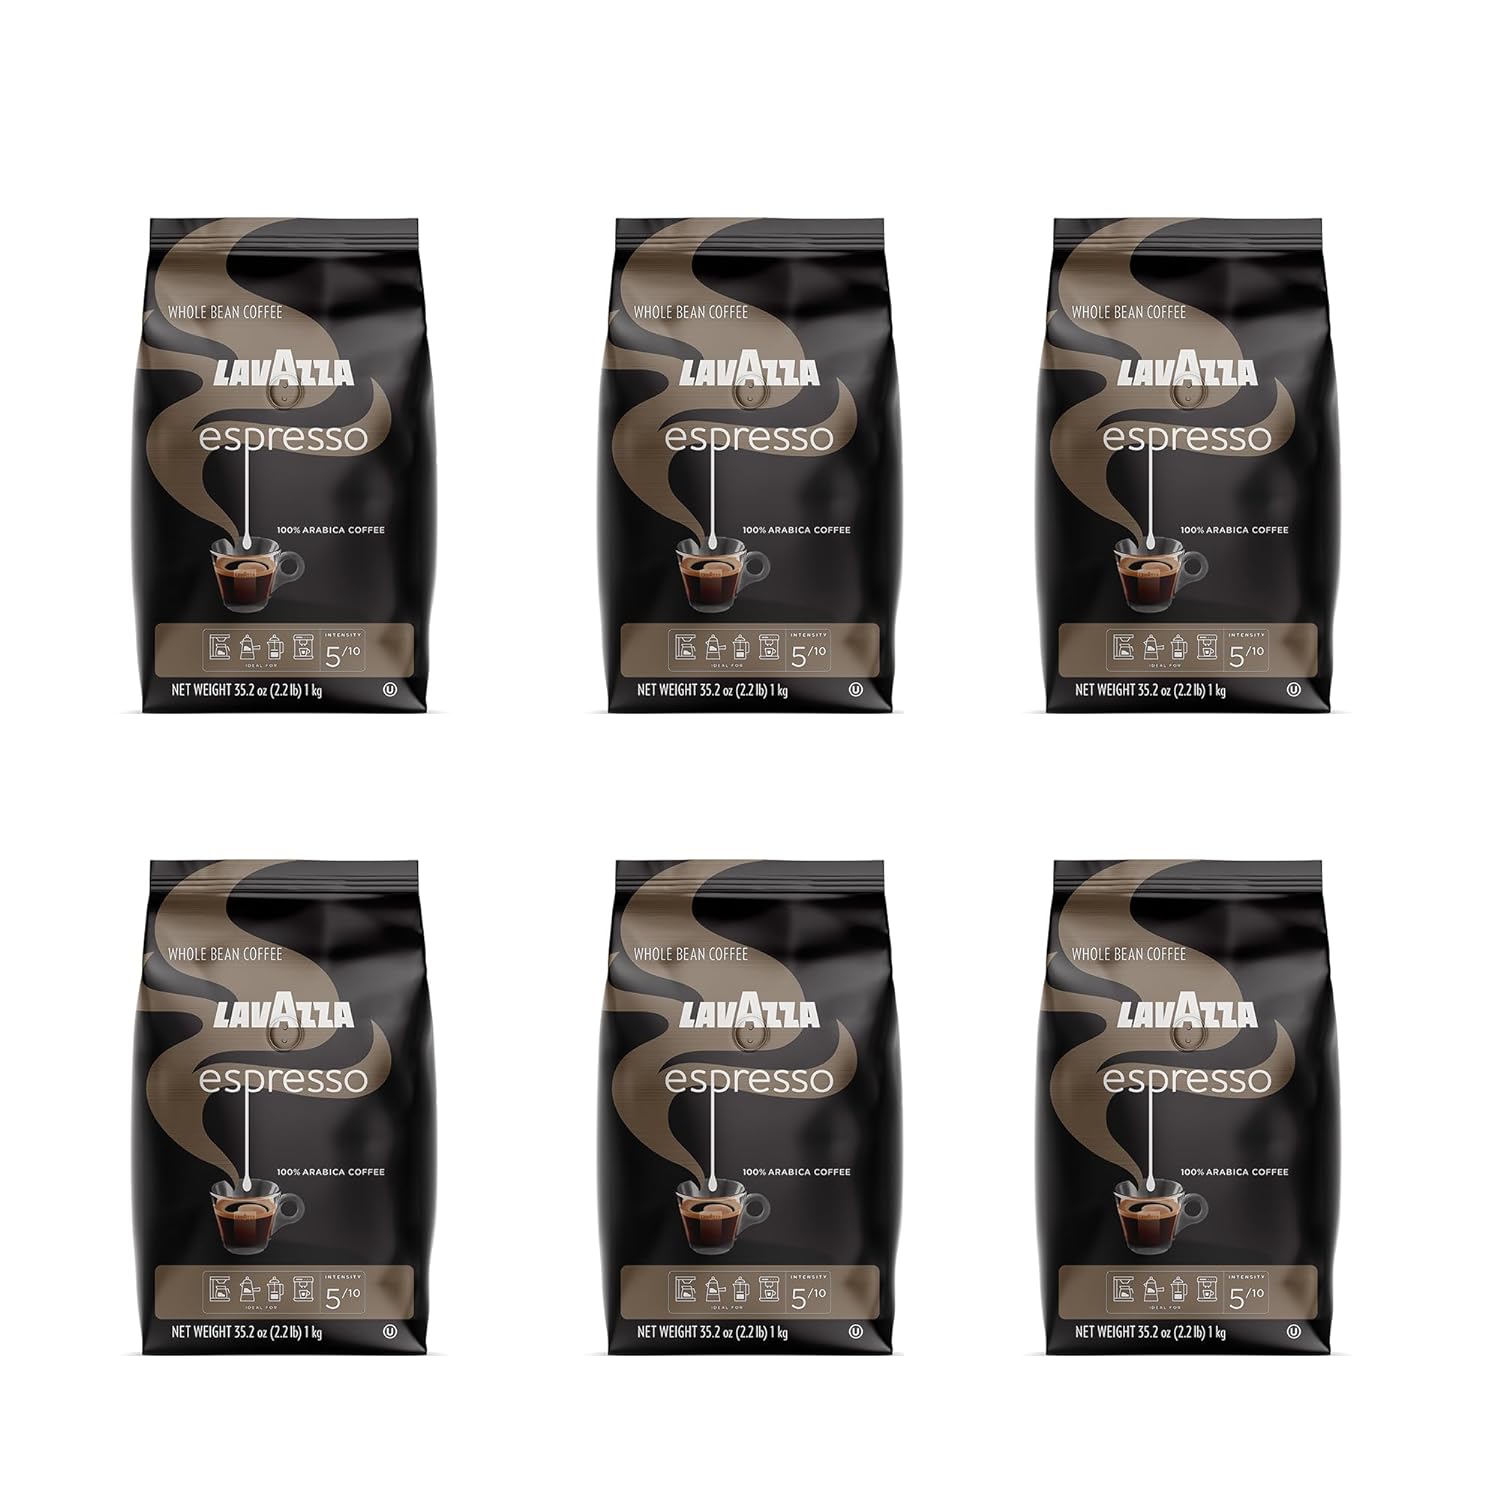 6-Pack 2.2lb Bags Lavazza Espresso Whole Bean Coffee Blend (Medium Roast) $54.60 ($9.10 each pack) w/ S&S + Free Shipping w/ Prime or on orders over $35